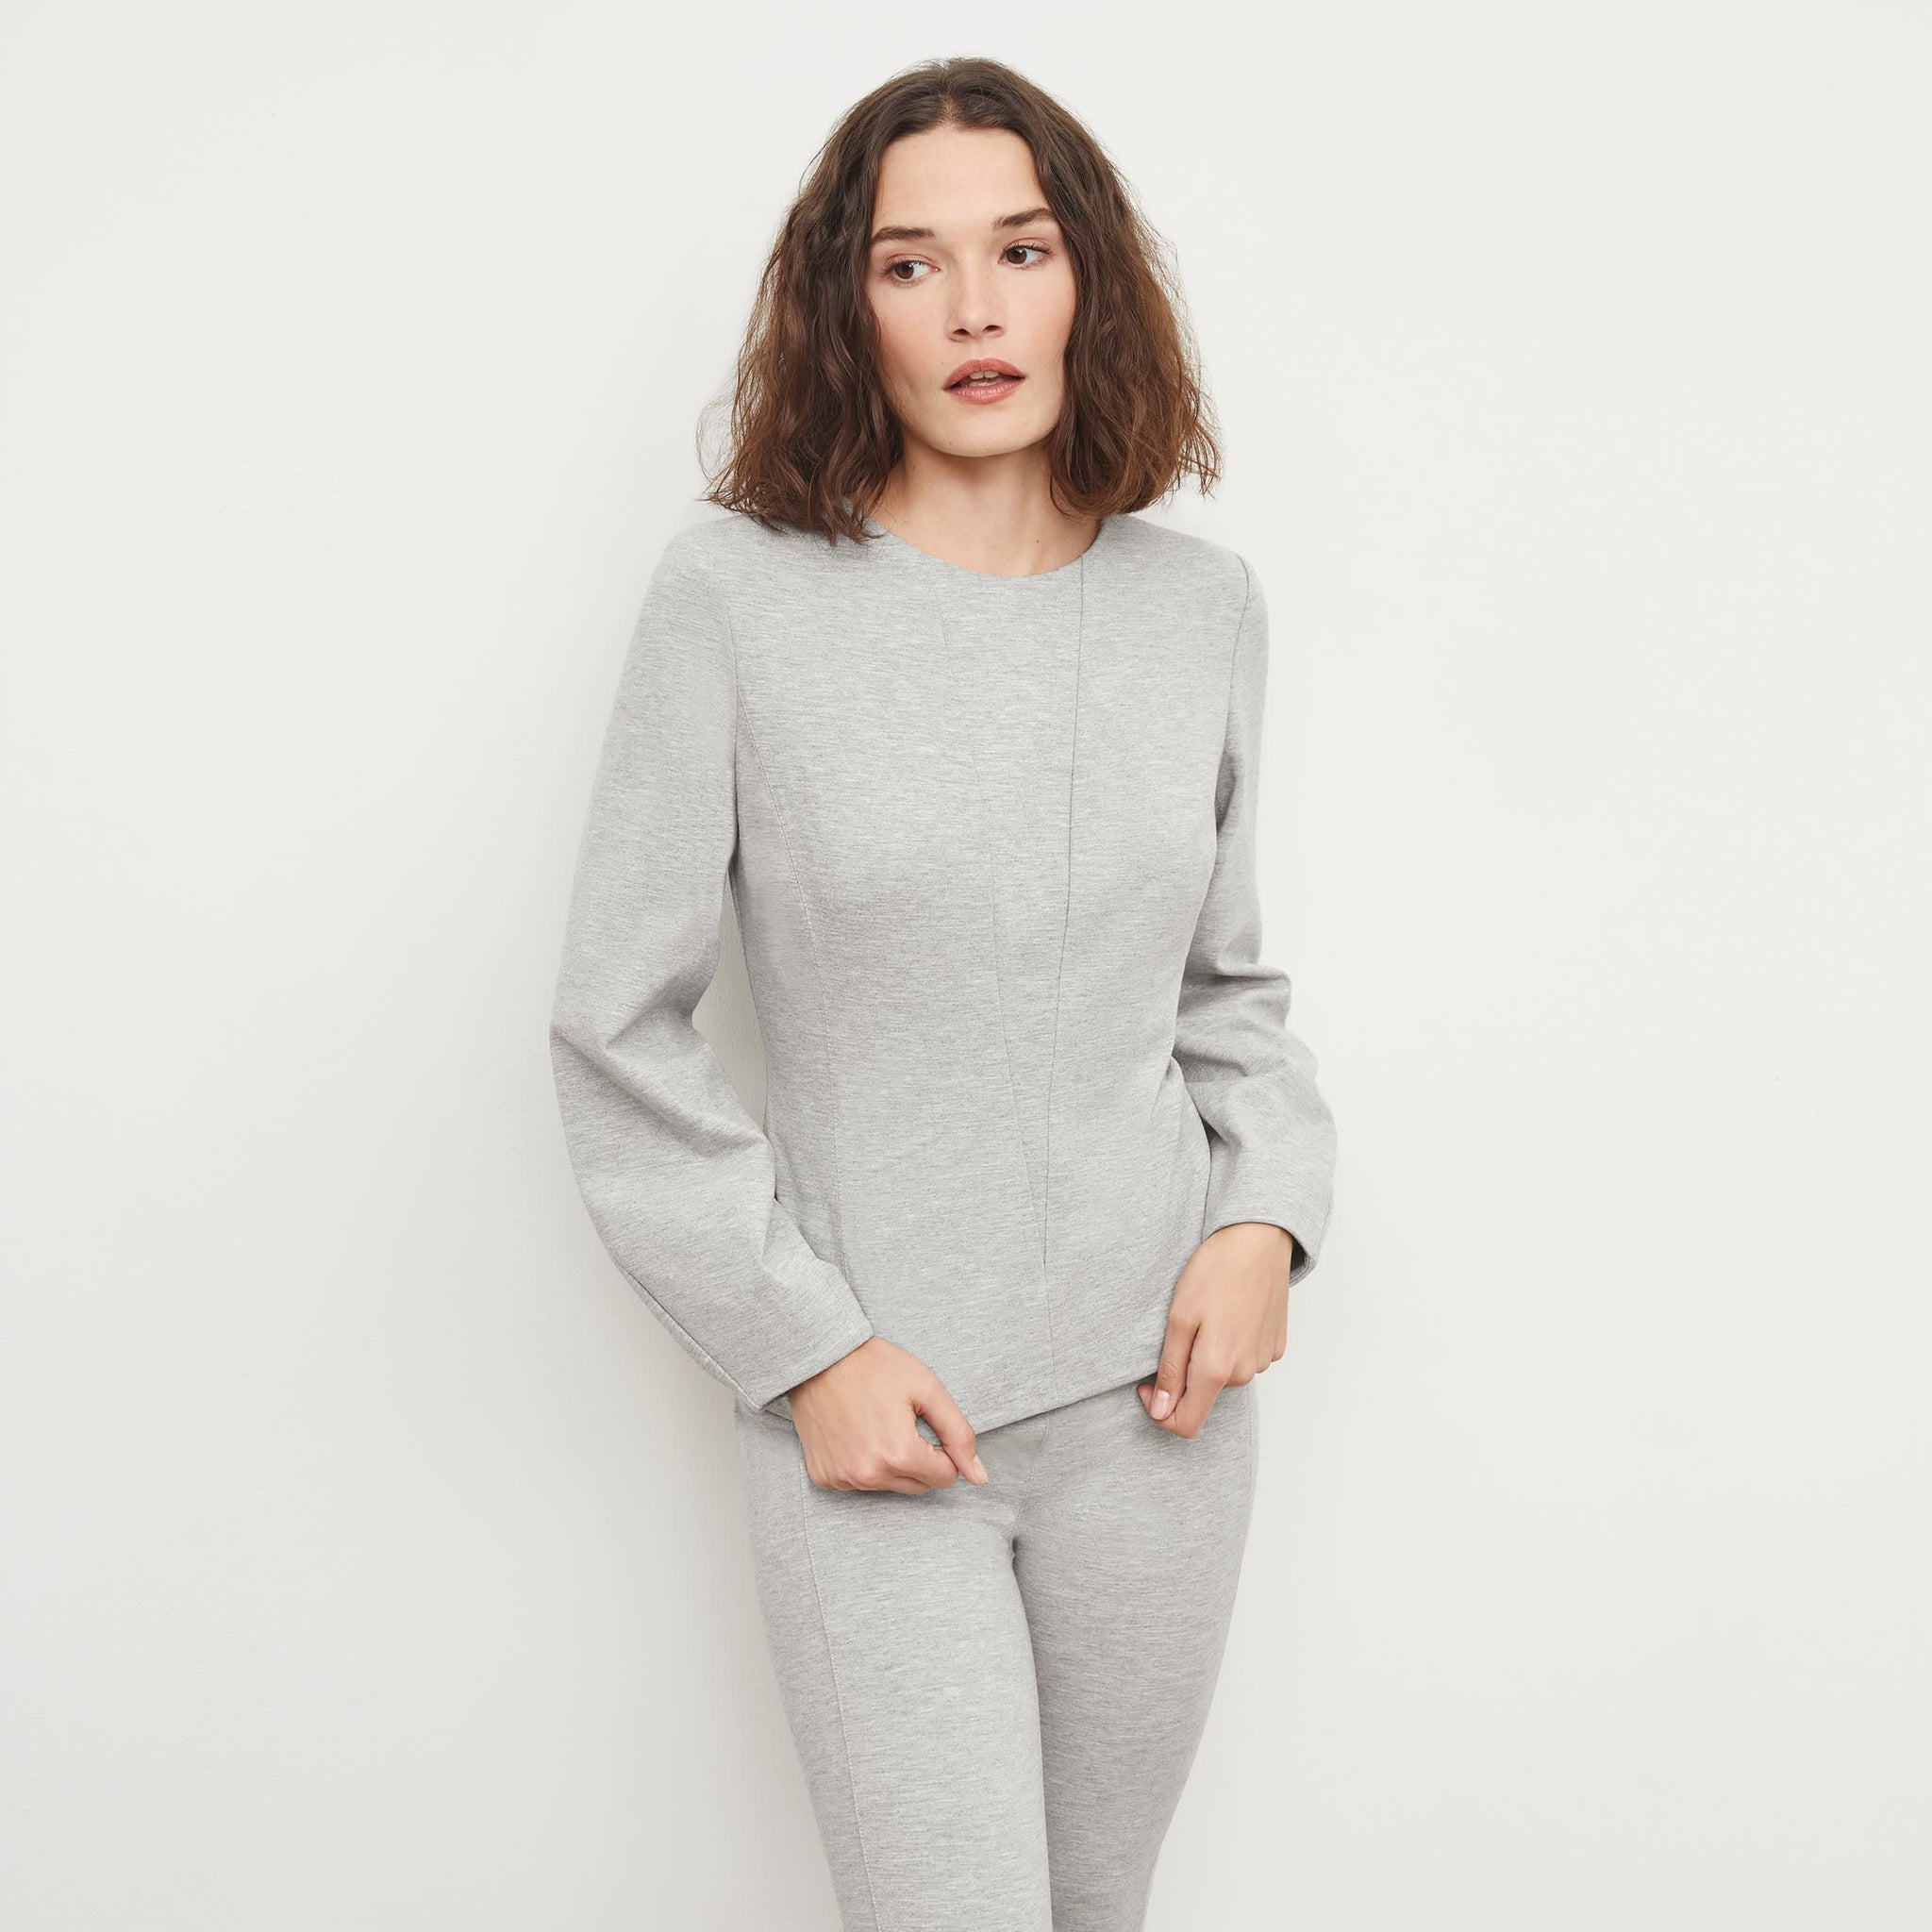 Front image of a woman standing wearing the Rashida Top in Gray Melange